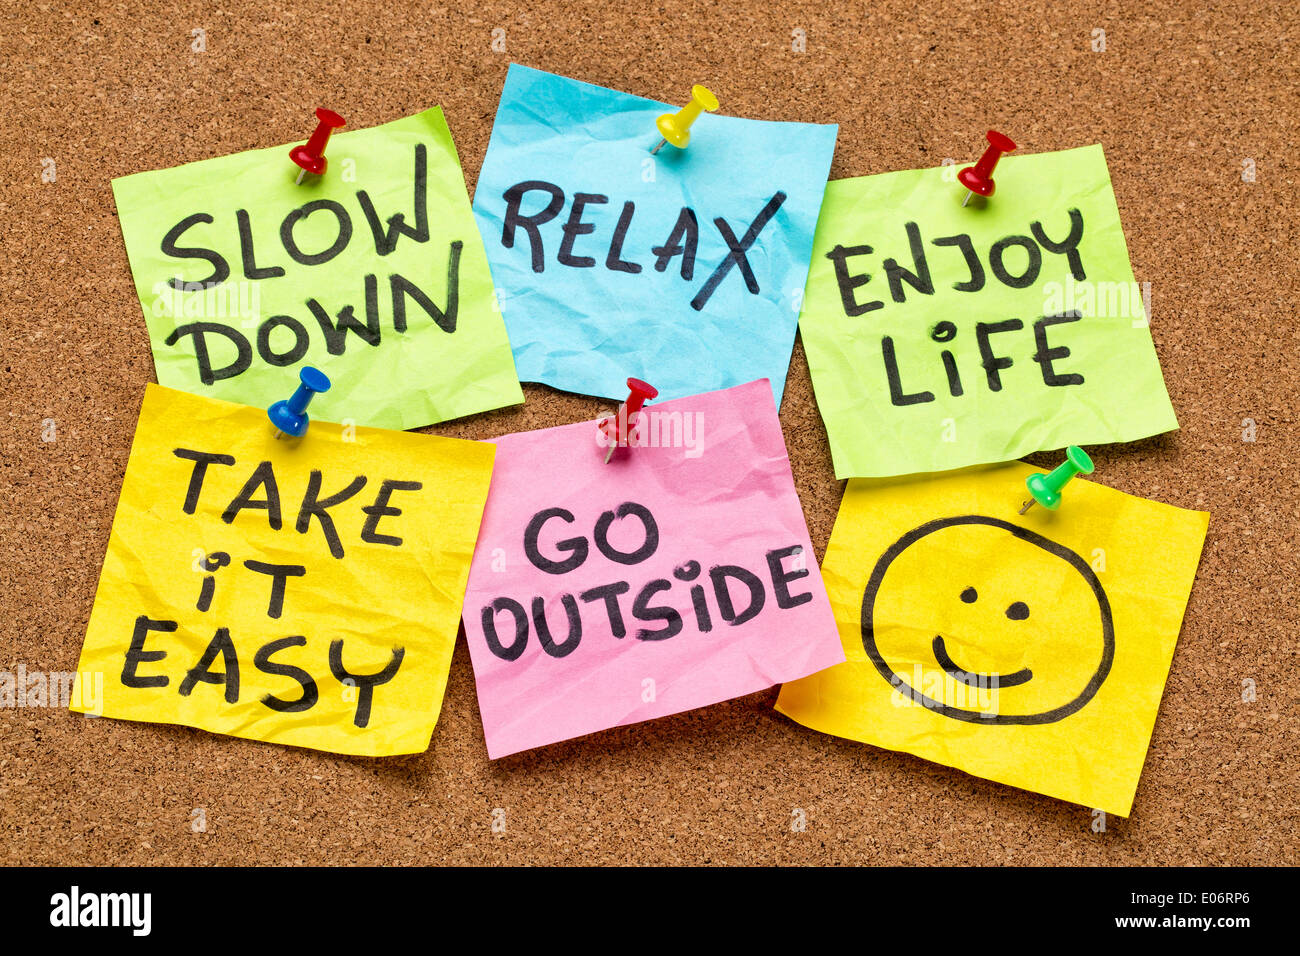 slow down, relax, take it easy, enjoy life - motivational lifestyle reminders on colorful sticky notes Stock Photo